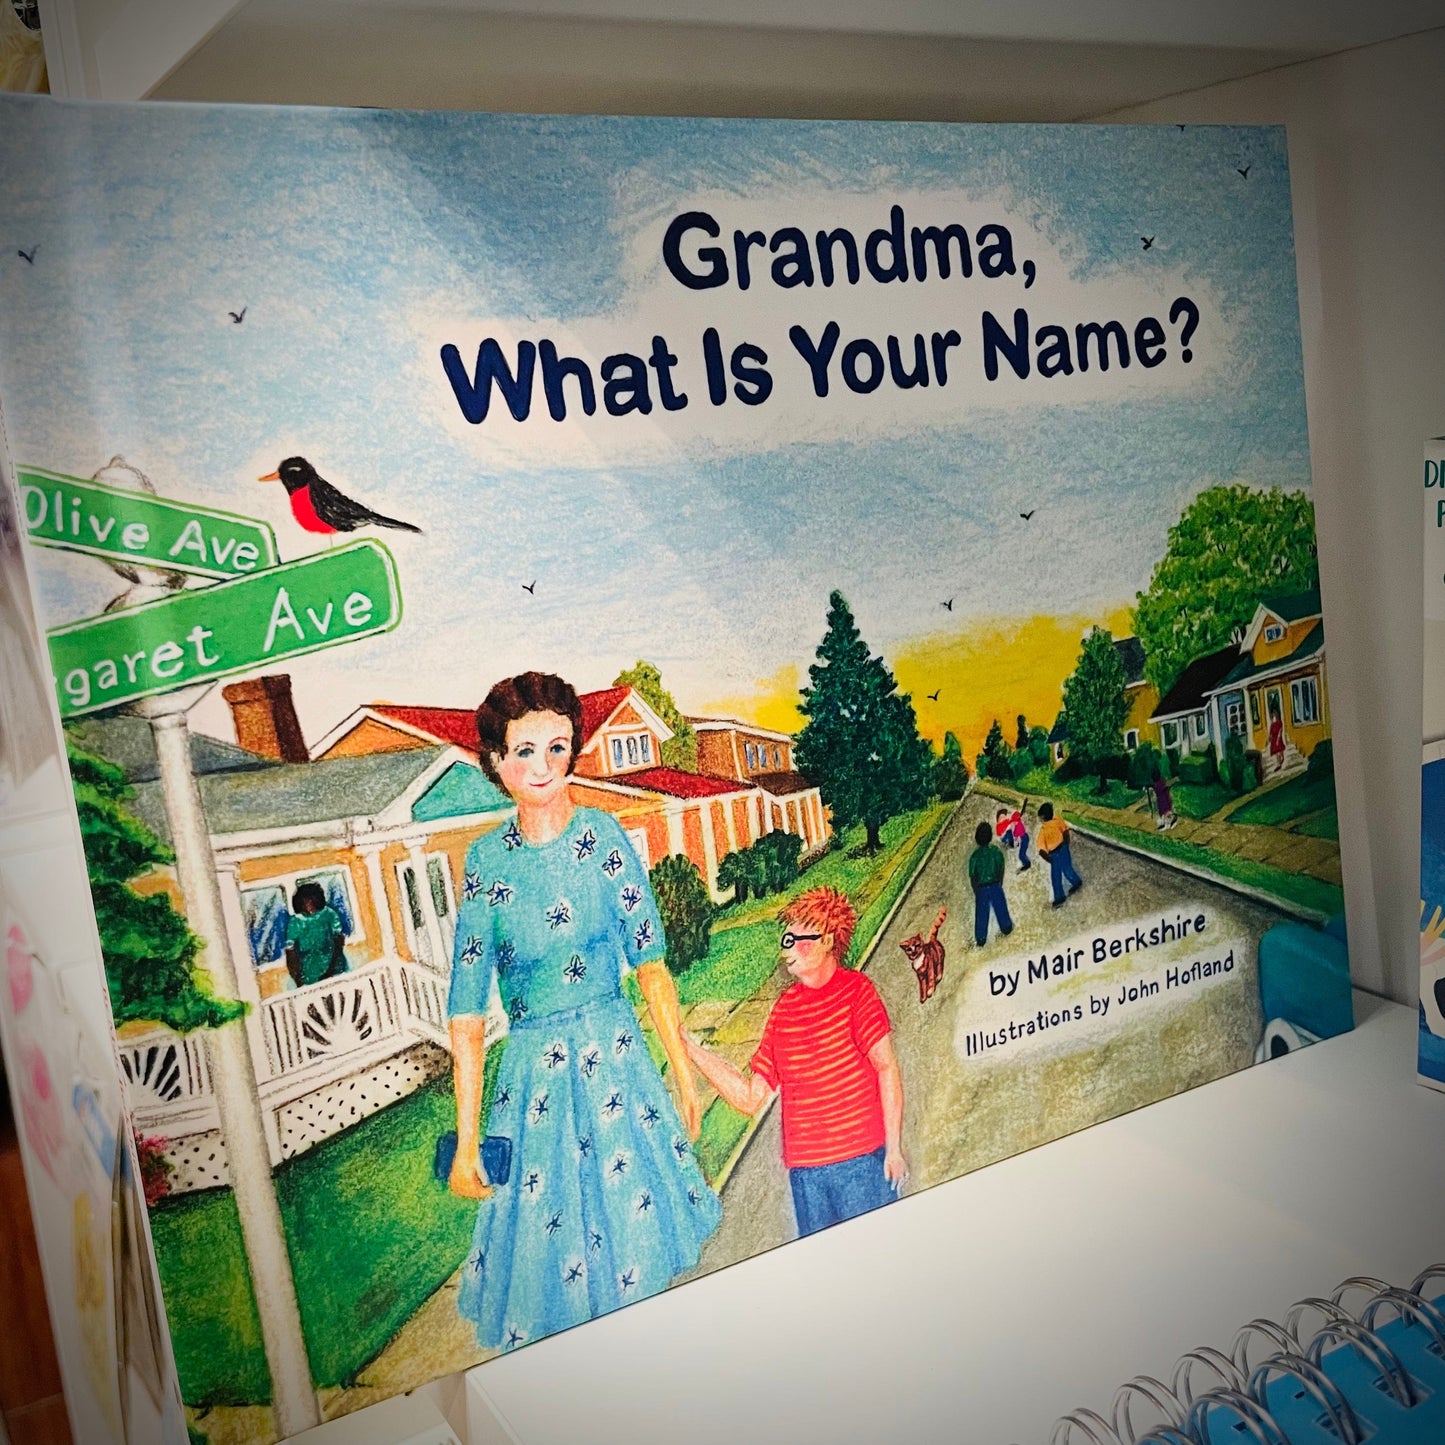 Grandma, What Is Your Name?